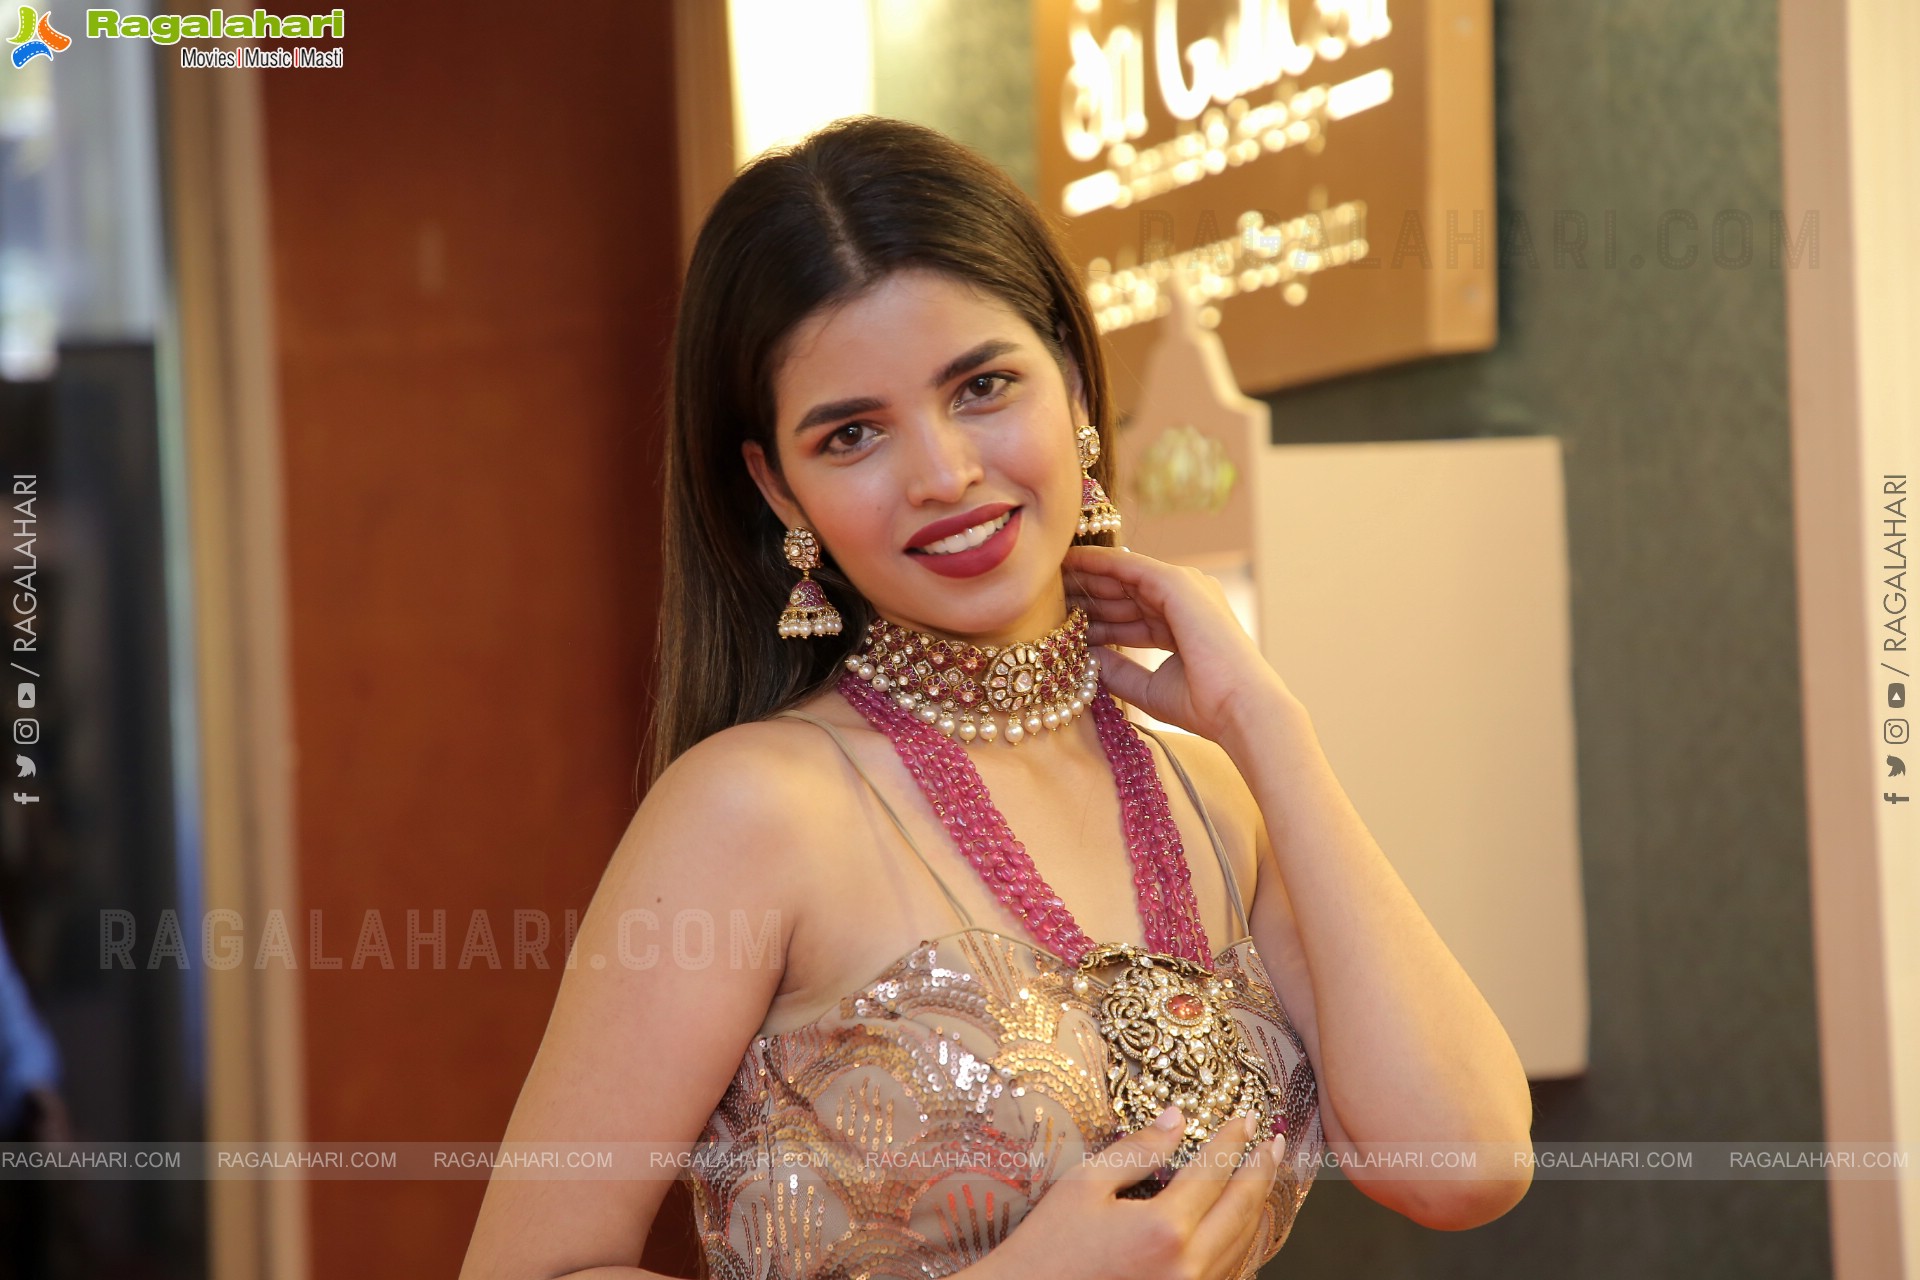 Urmila Chauhan Poses With Jewellery, HD Photo Gallery